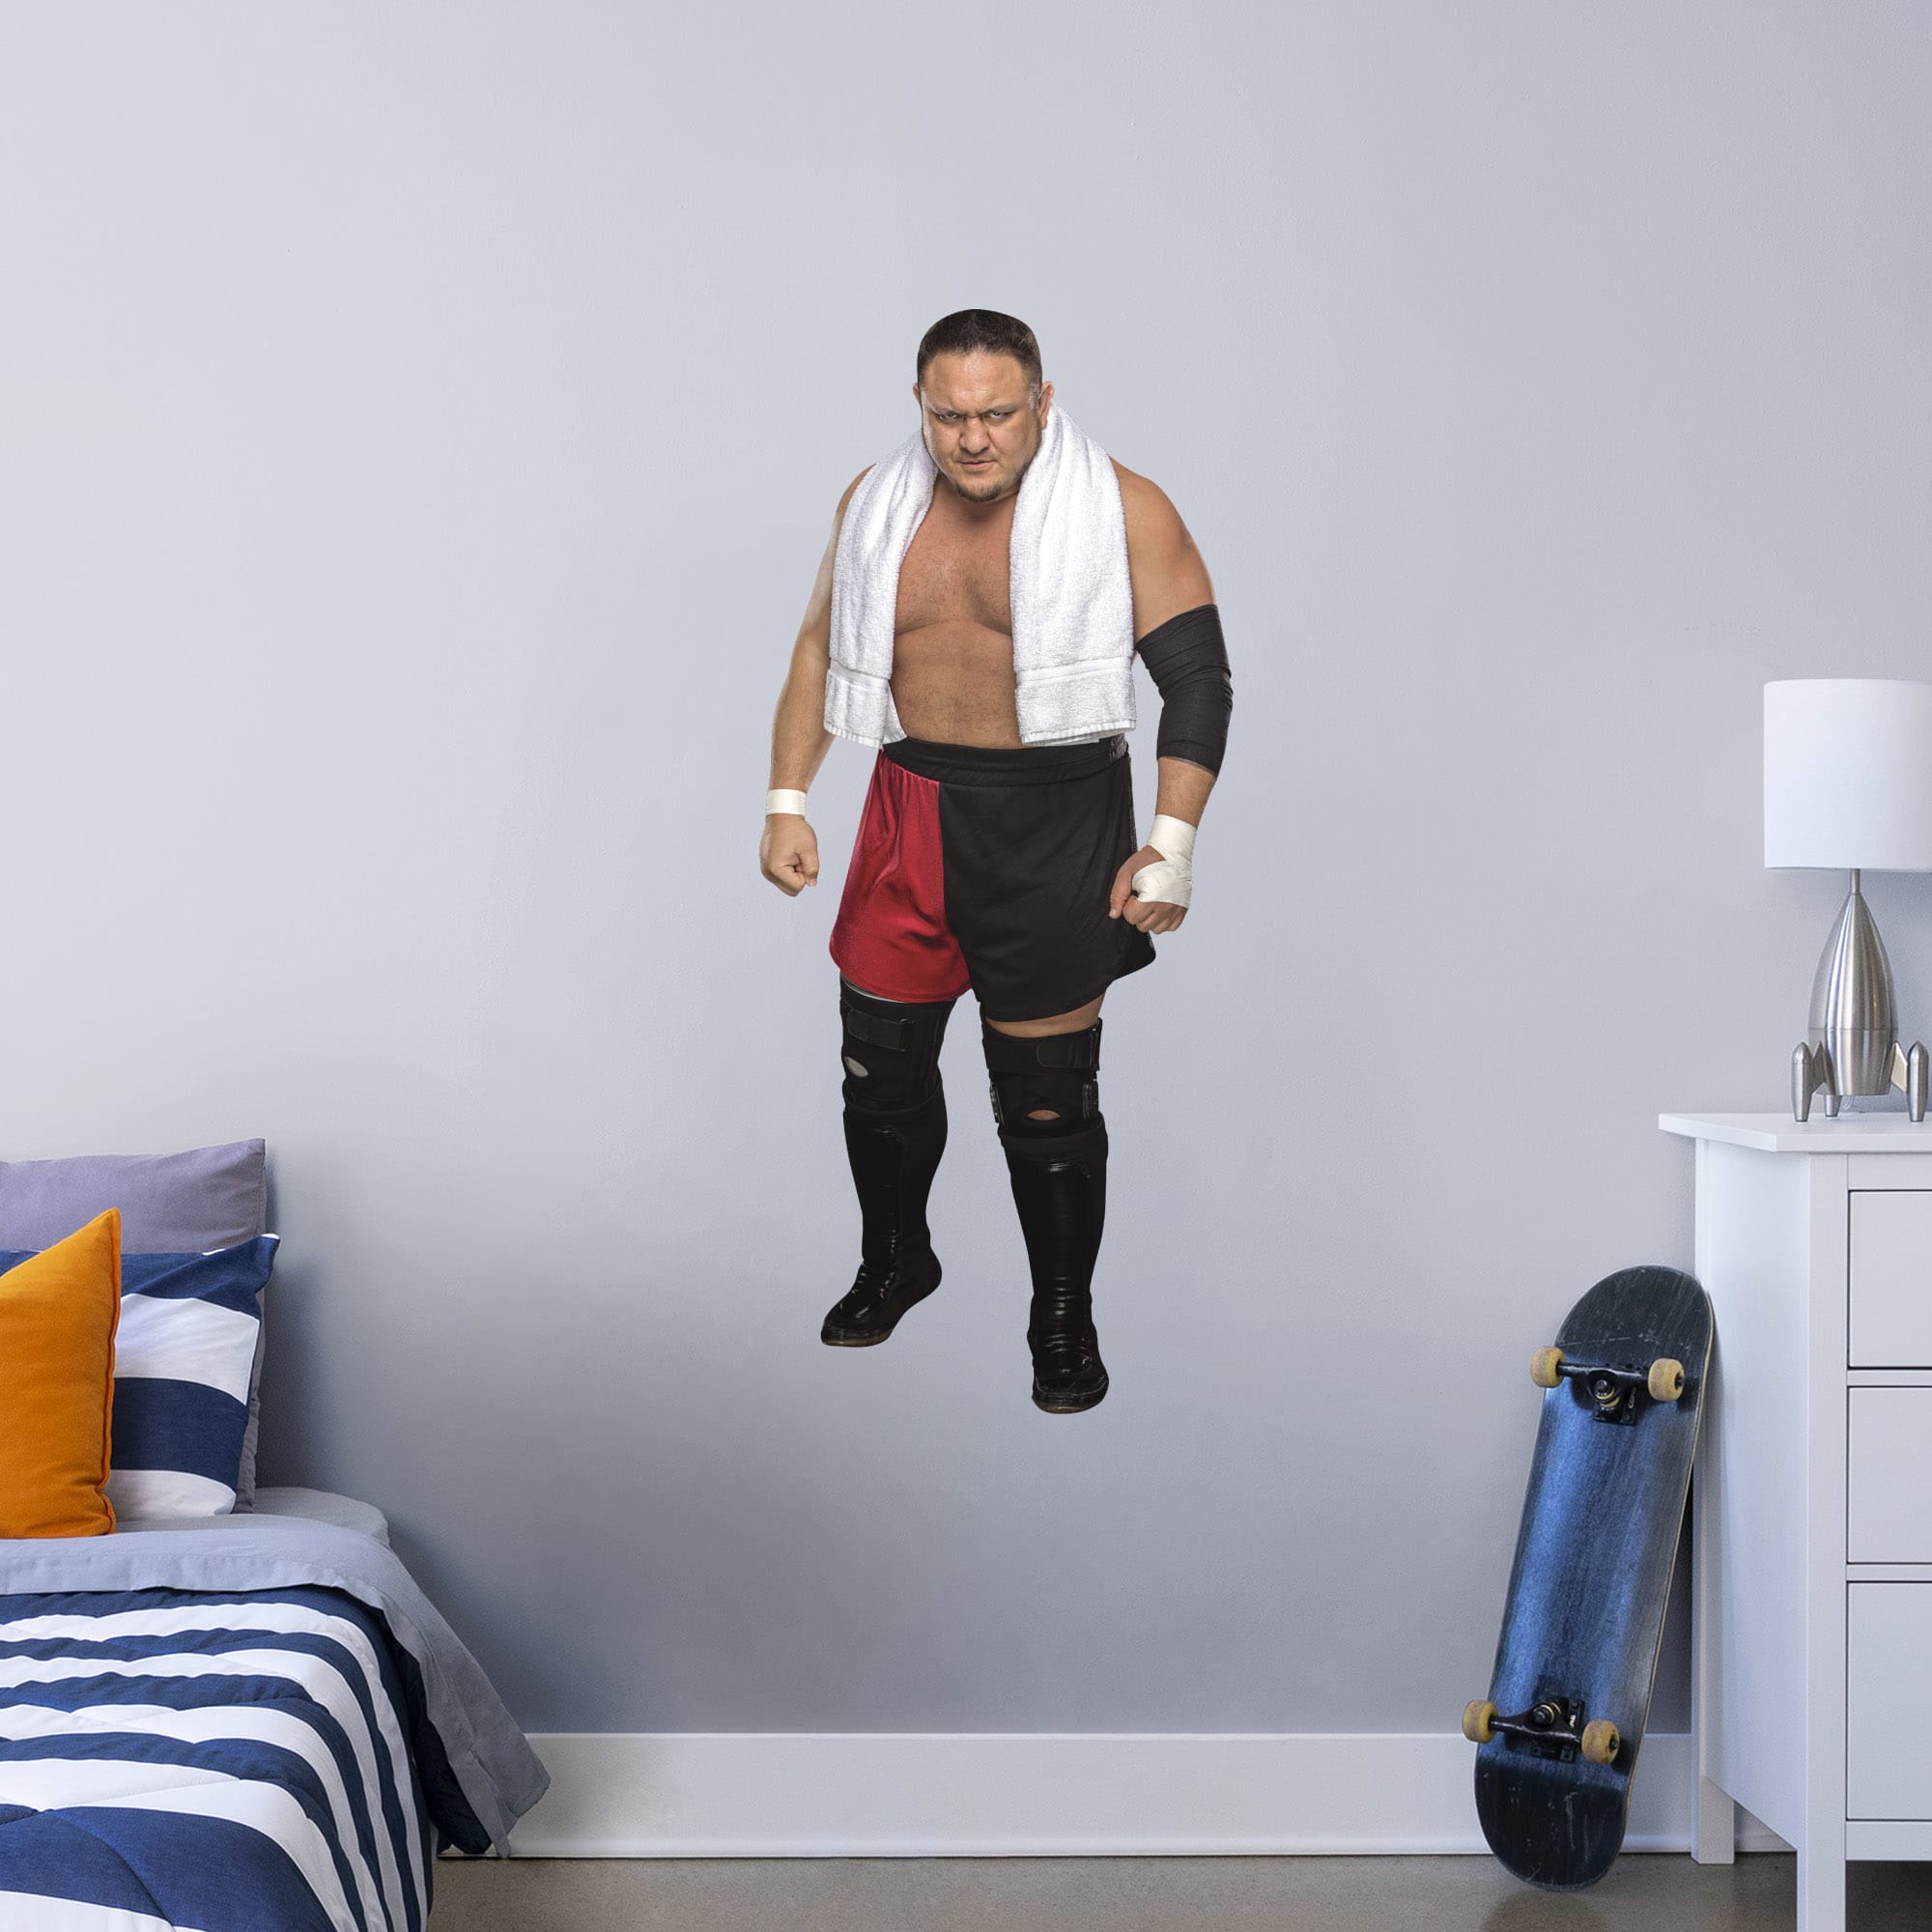 Samoa Joe for WWE - Officially Licensed Removable Wall Decal Giant Superstar + 2 Decals (22"W x 51"H) by Fathead | Vinyl